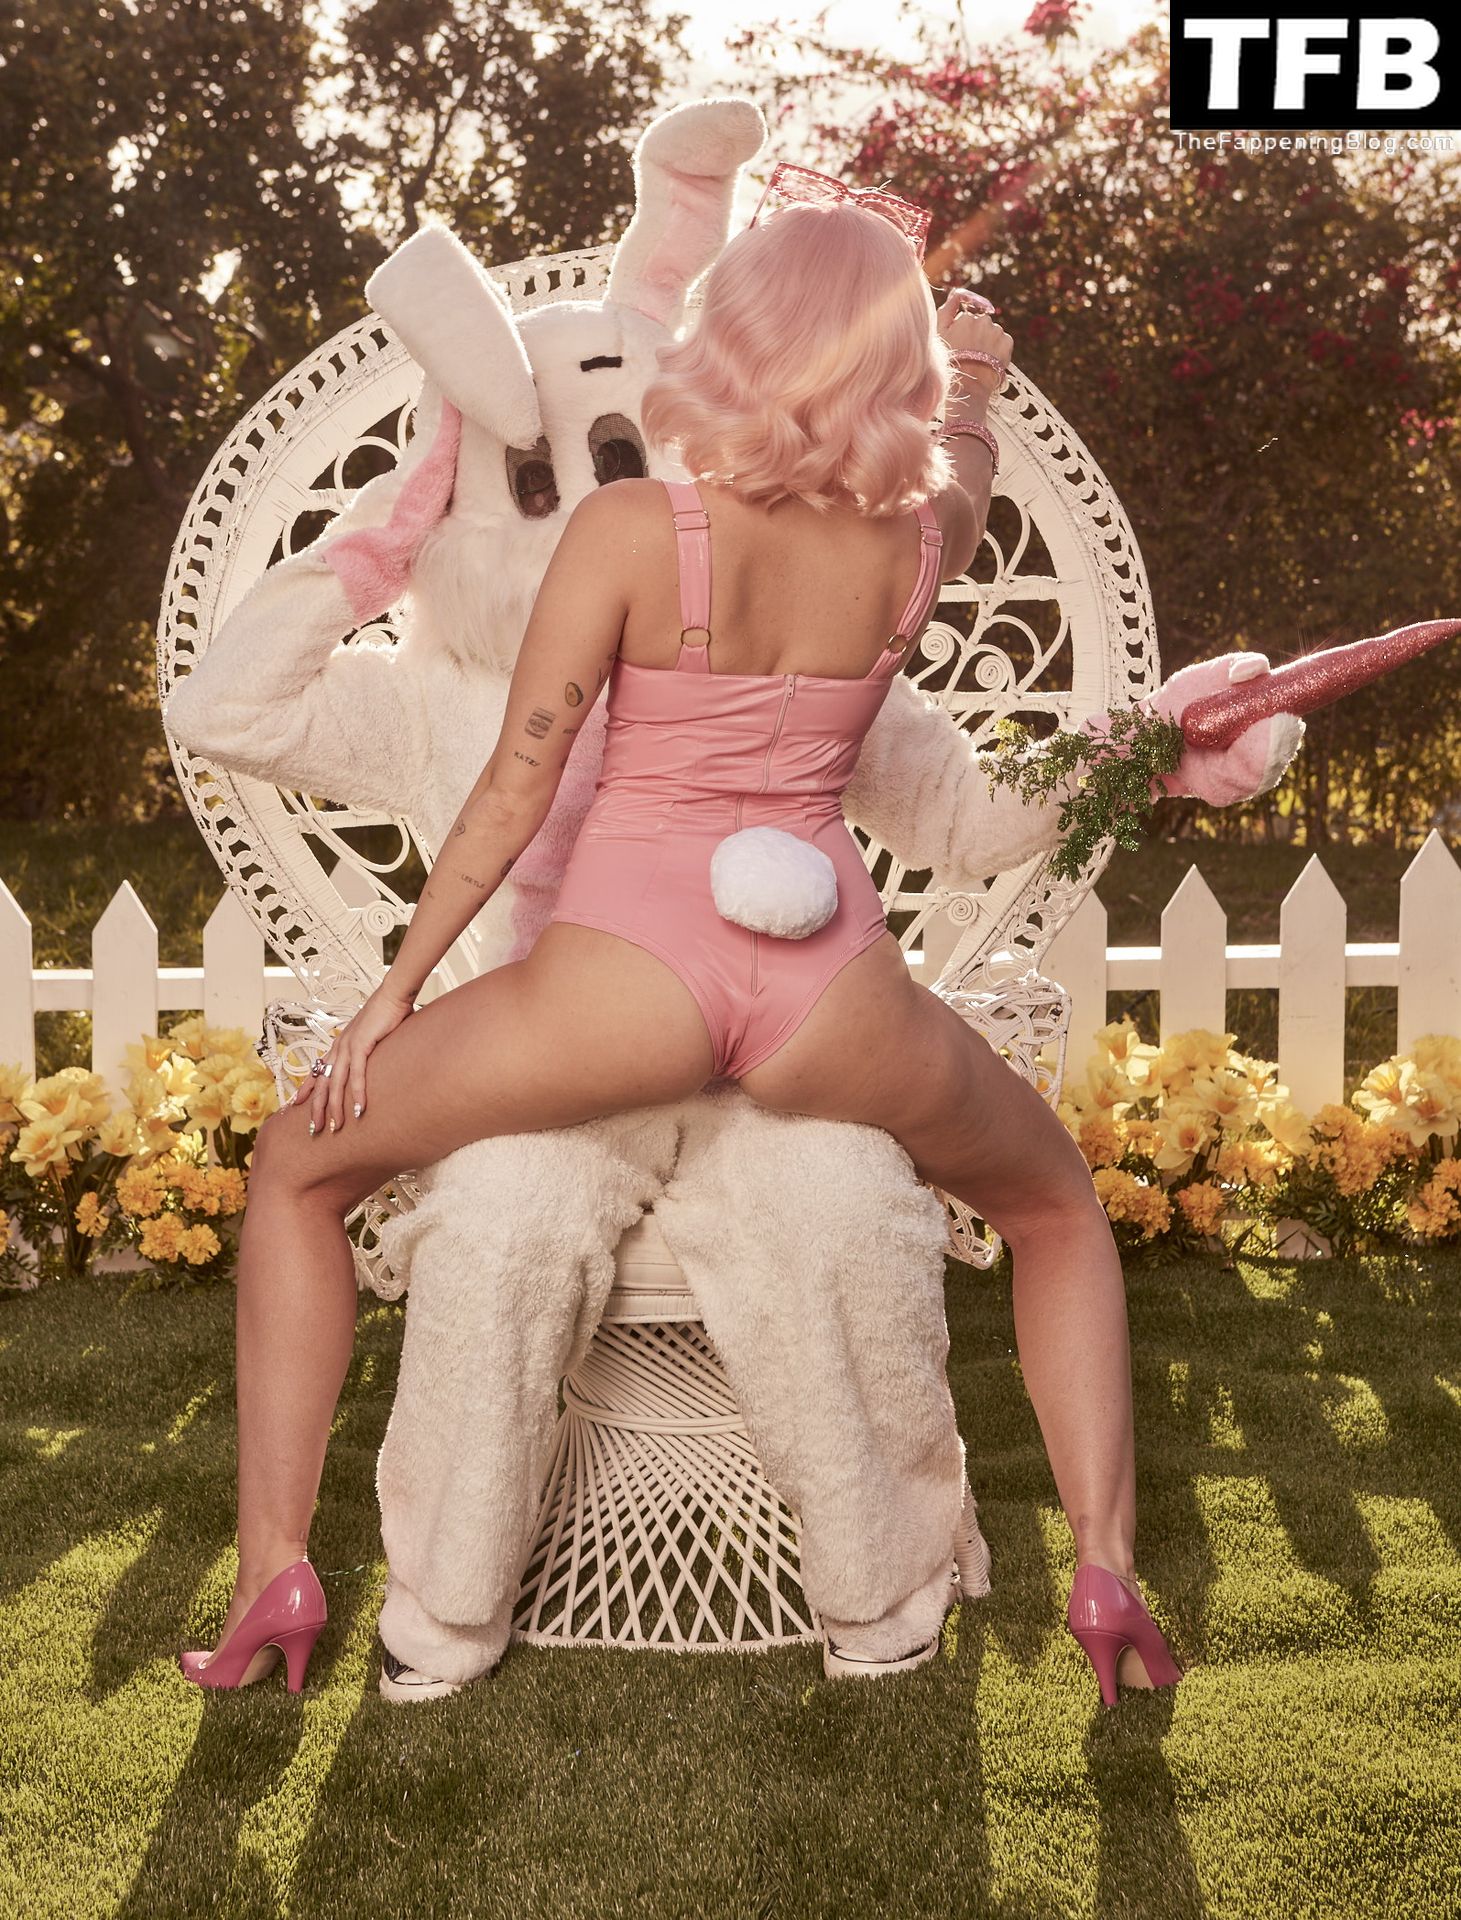 Miley-Cyrus-Nude-Sexy-Vogue-Magazine-Outtakes-The-Fappening-Blog-37.jpg